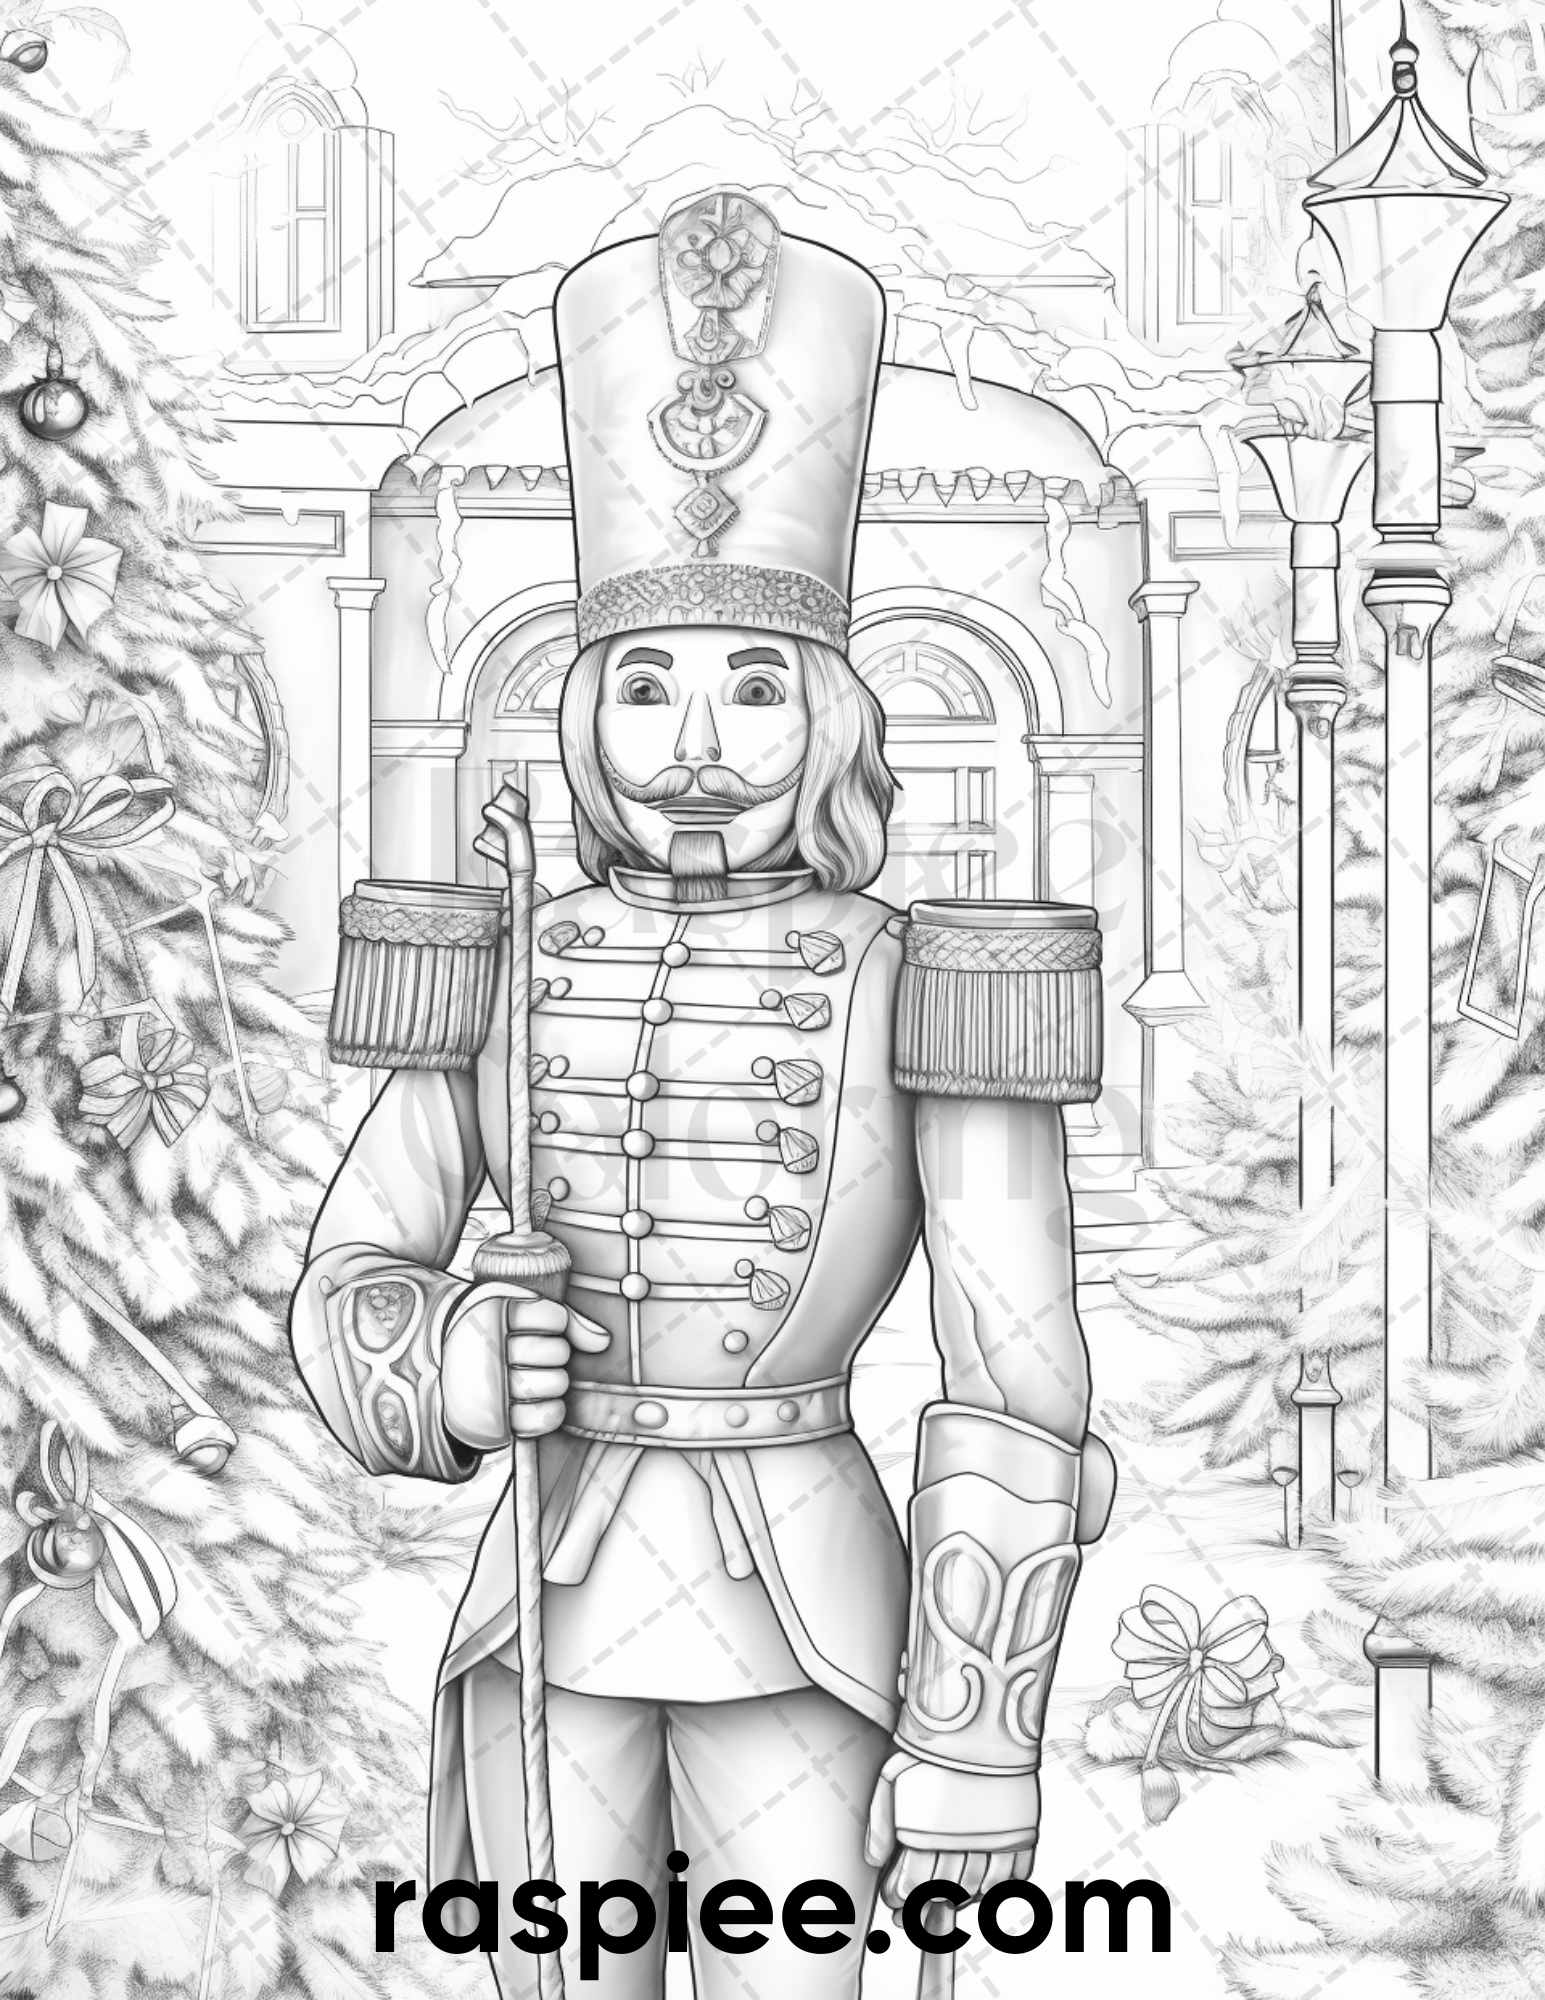 Christmas Nutcracker Coloring Page, Grayscale Adult Coloring Illustration, Holiday Stress-Relief Craft, Detailed Christmas Drawing, Seasonal Coloring Book, Winter Relaxation Activity, High-Quality Xmas Coloring, Christmas Coloring Pages, Xmas Coloring Pages, Christmas Coloring Sheets, Winter Coloring Pages, Holiday Coloing Pages